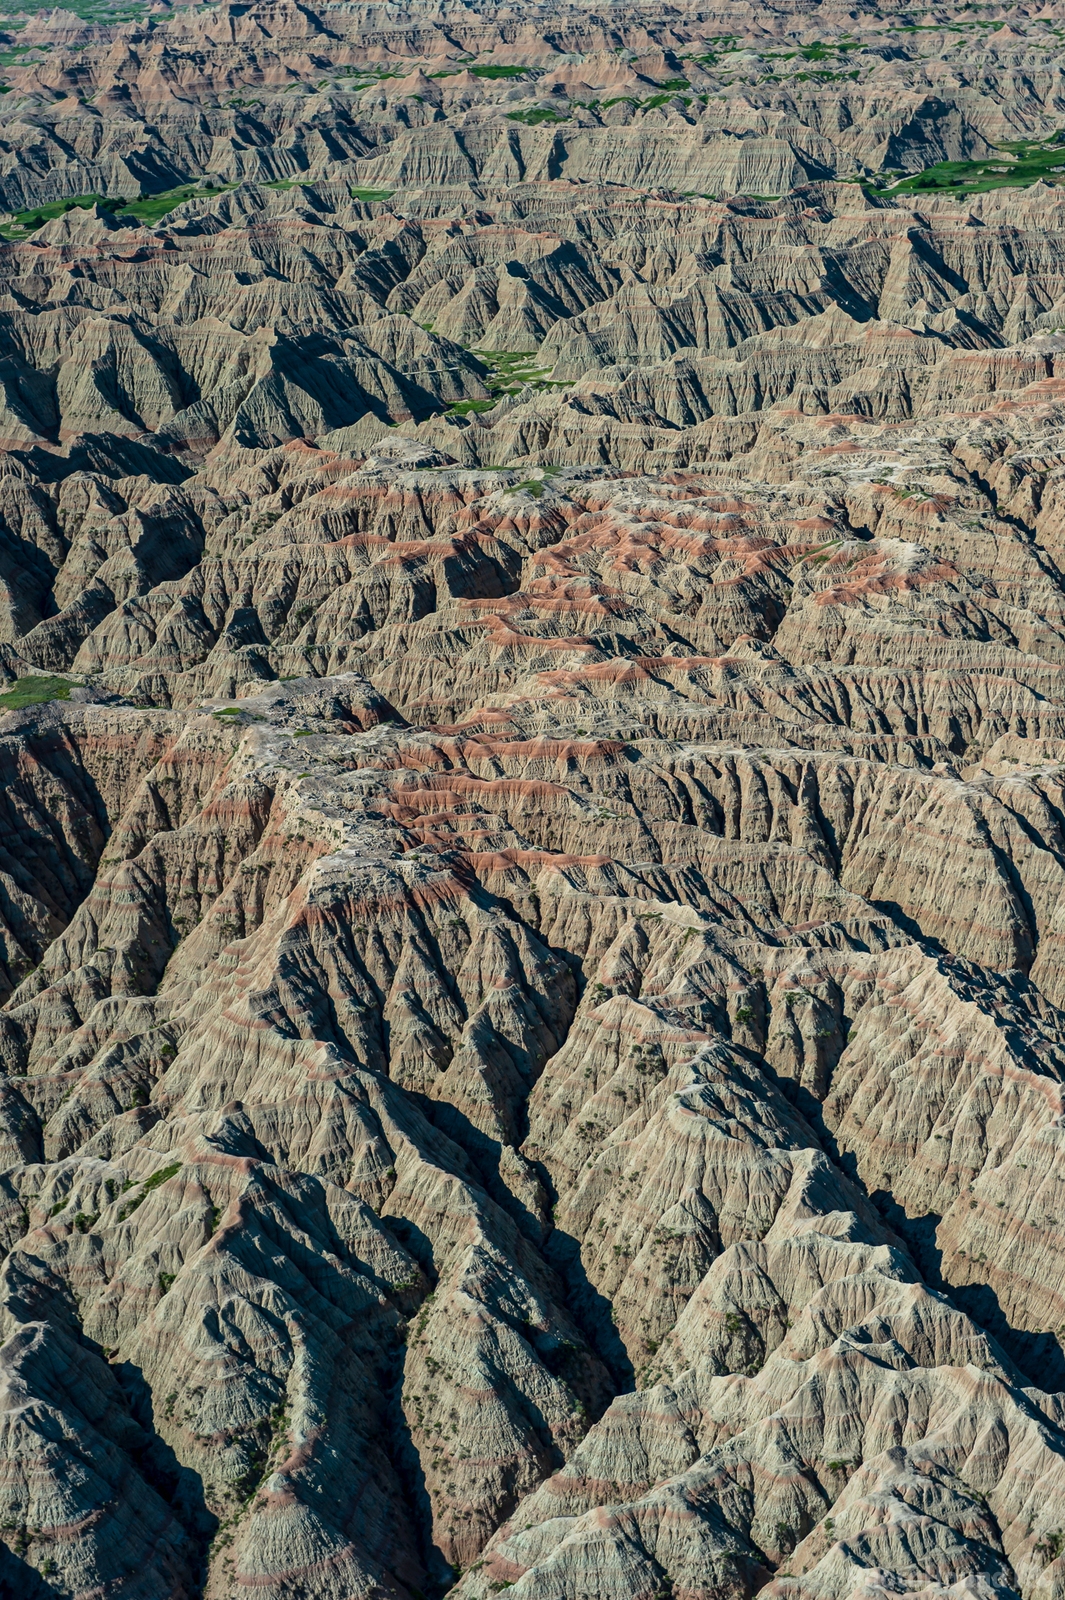 Image of Badlands N.P. Helicopter Tour by Sue Wolfe